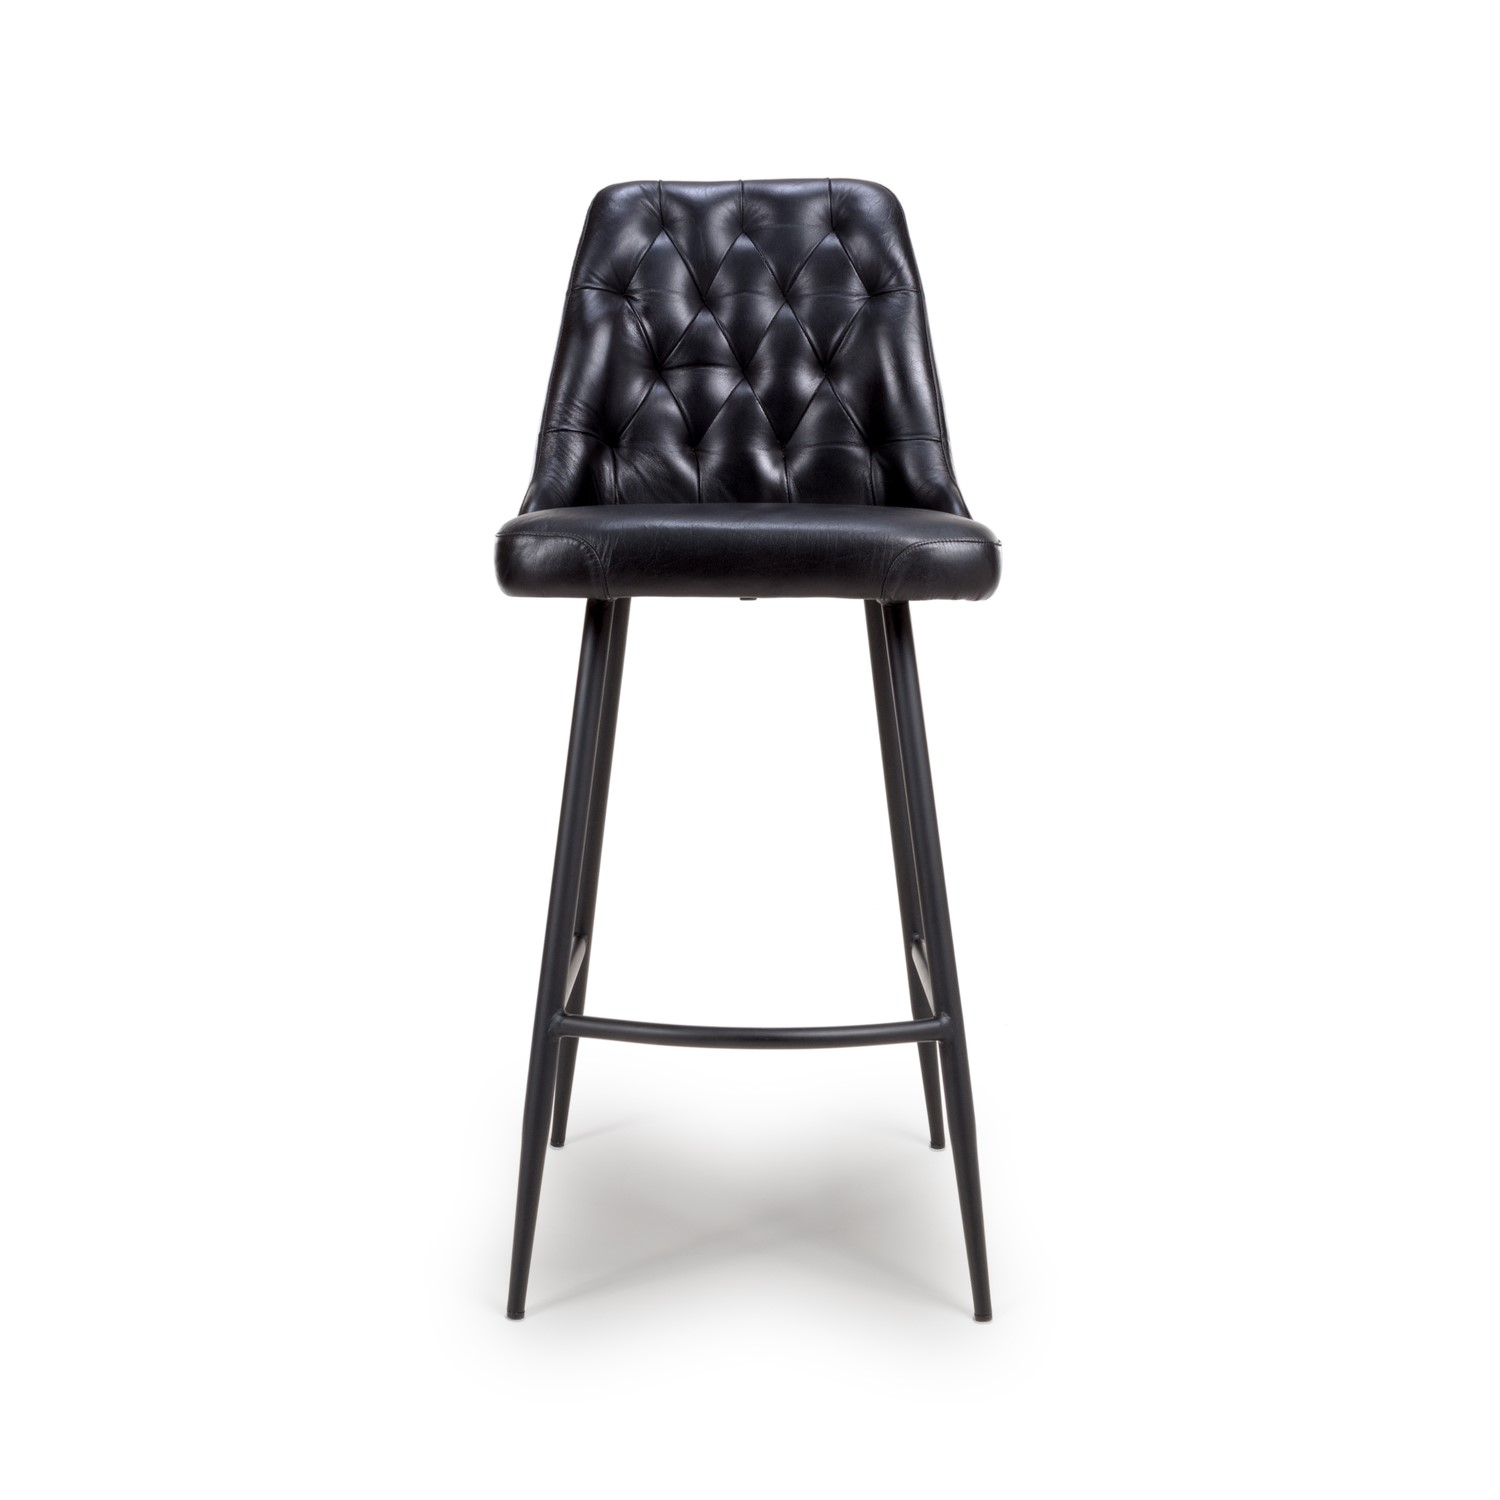 Read more about Set of 2 real leather black kitchen stools with quilted back jaxson